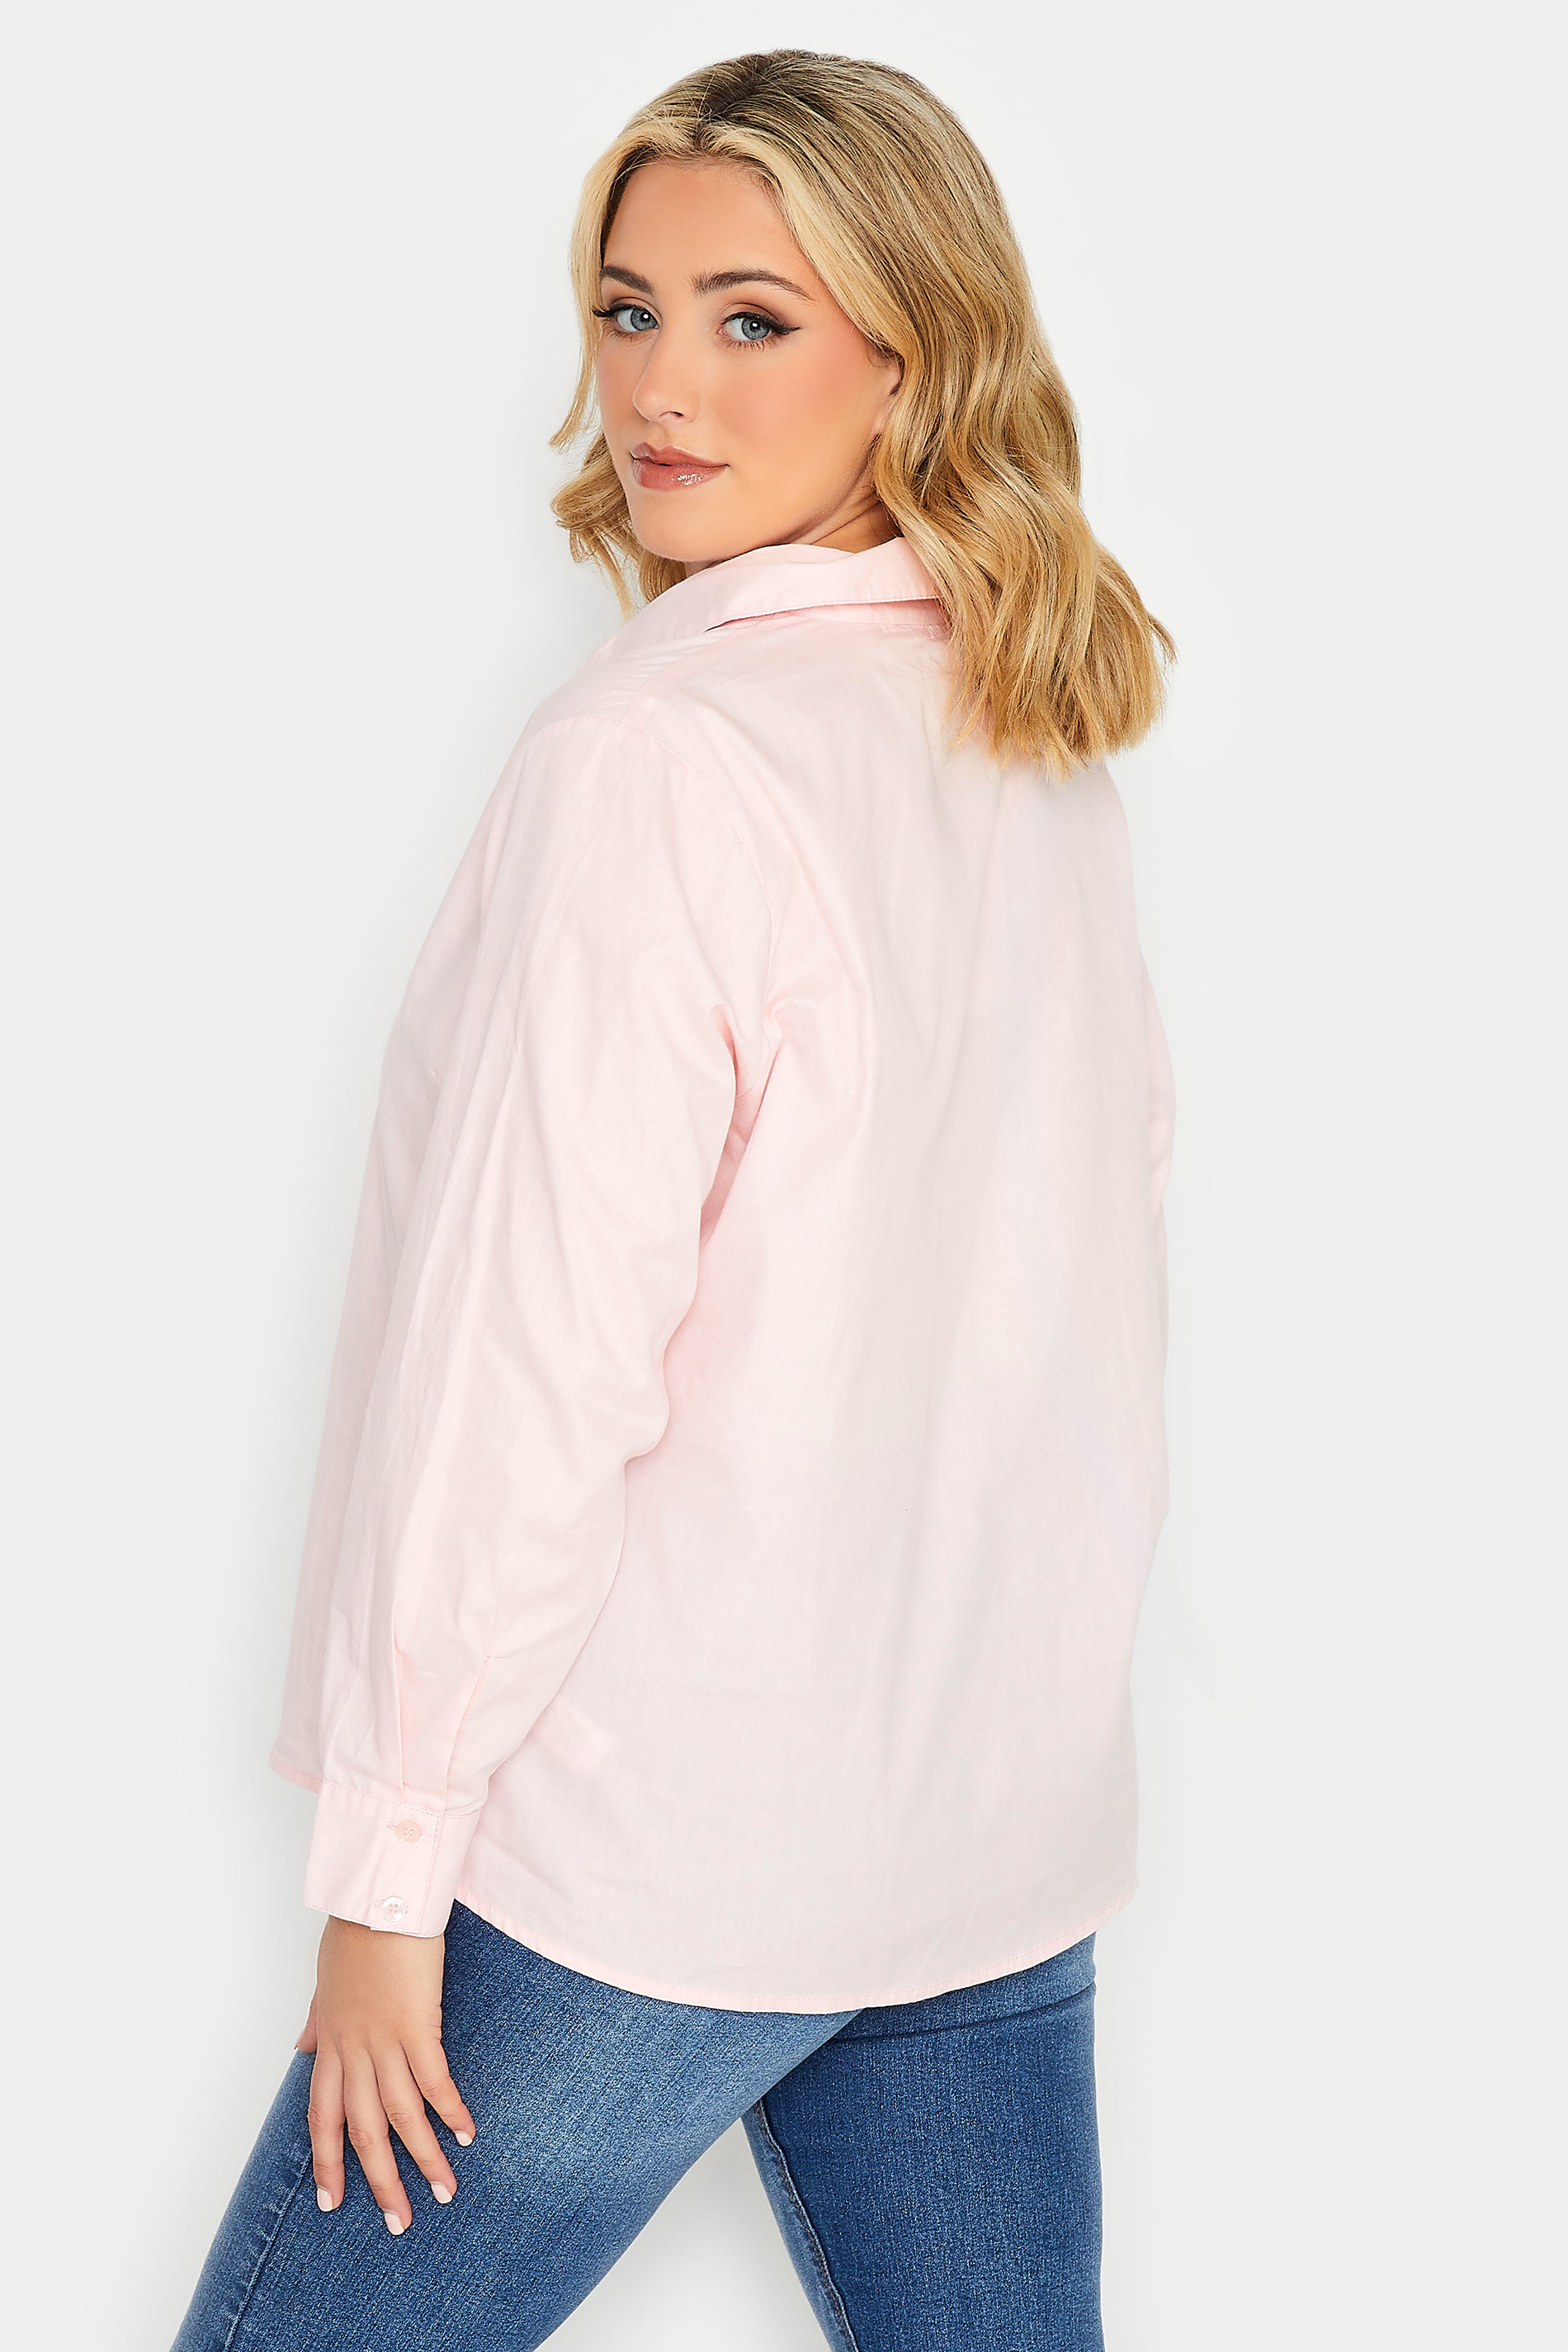 YOURS PETITE Plus Size Pink Fitted Cotton Shirt | Yours Clothing 3